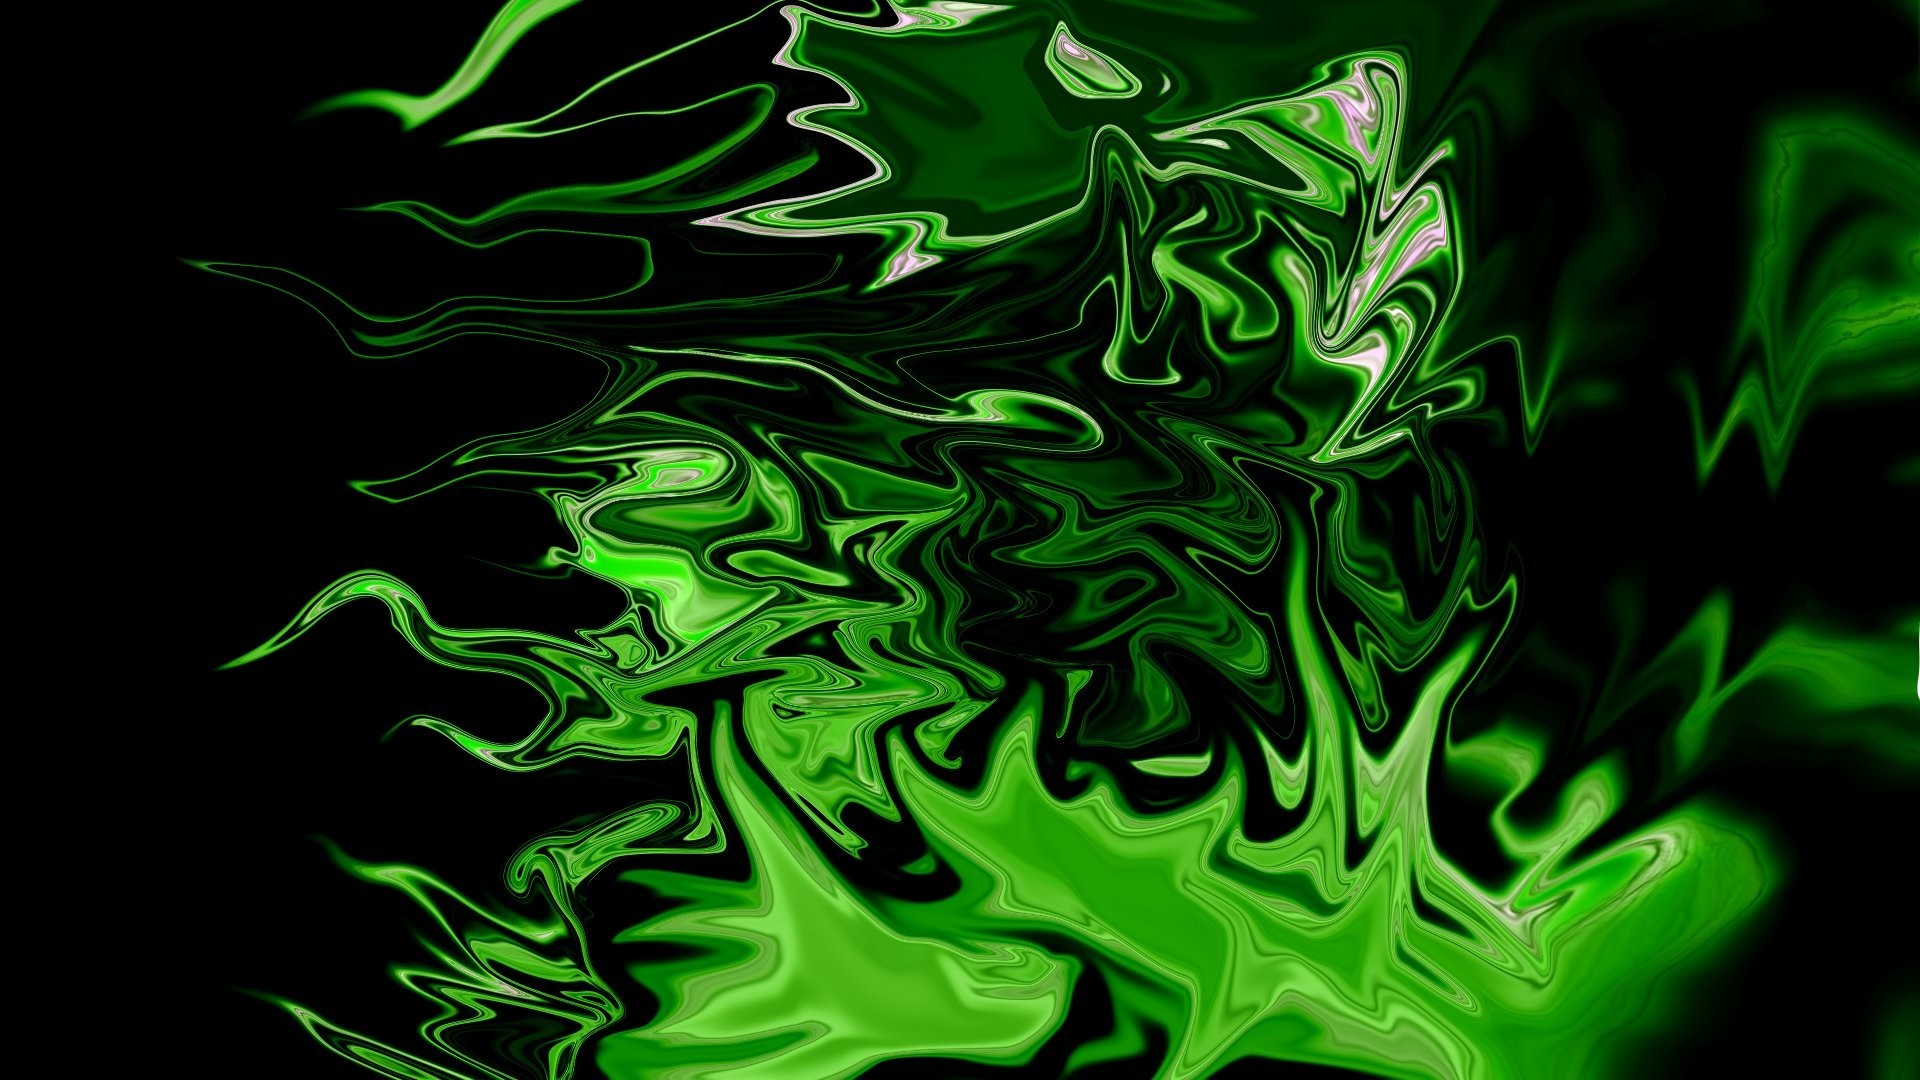 1920x1080  Green And Black Images 7 Free Wallpaper